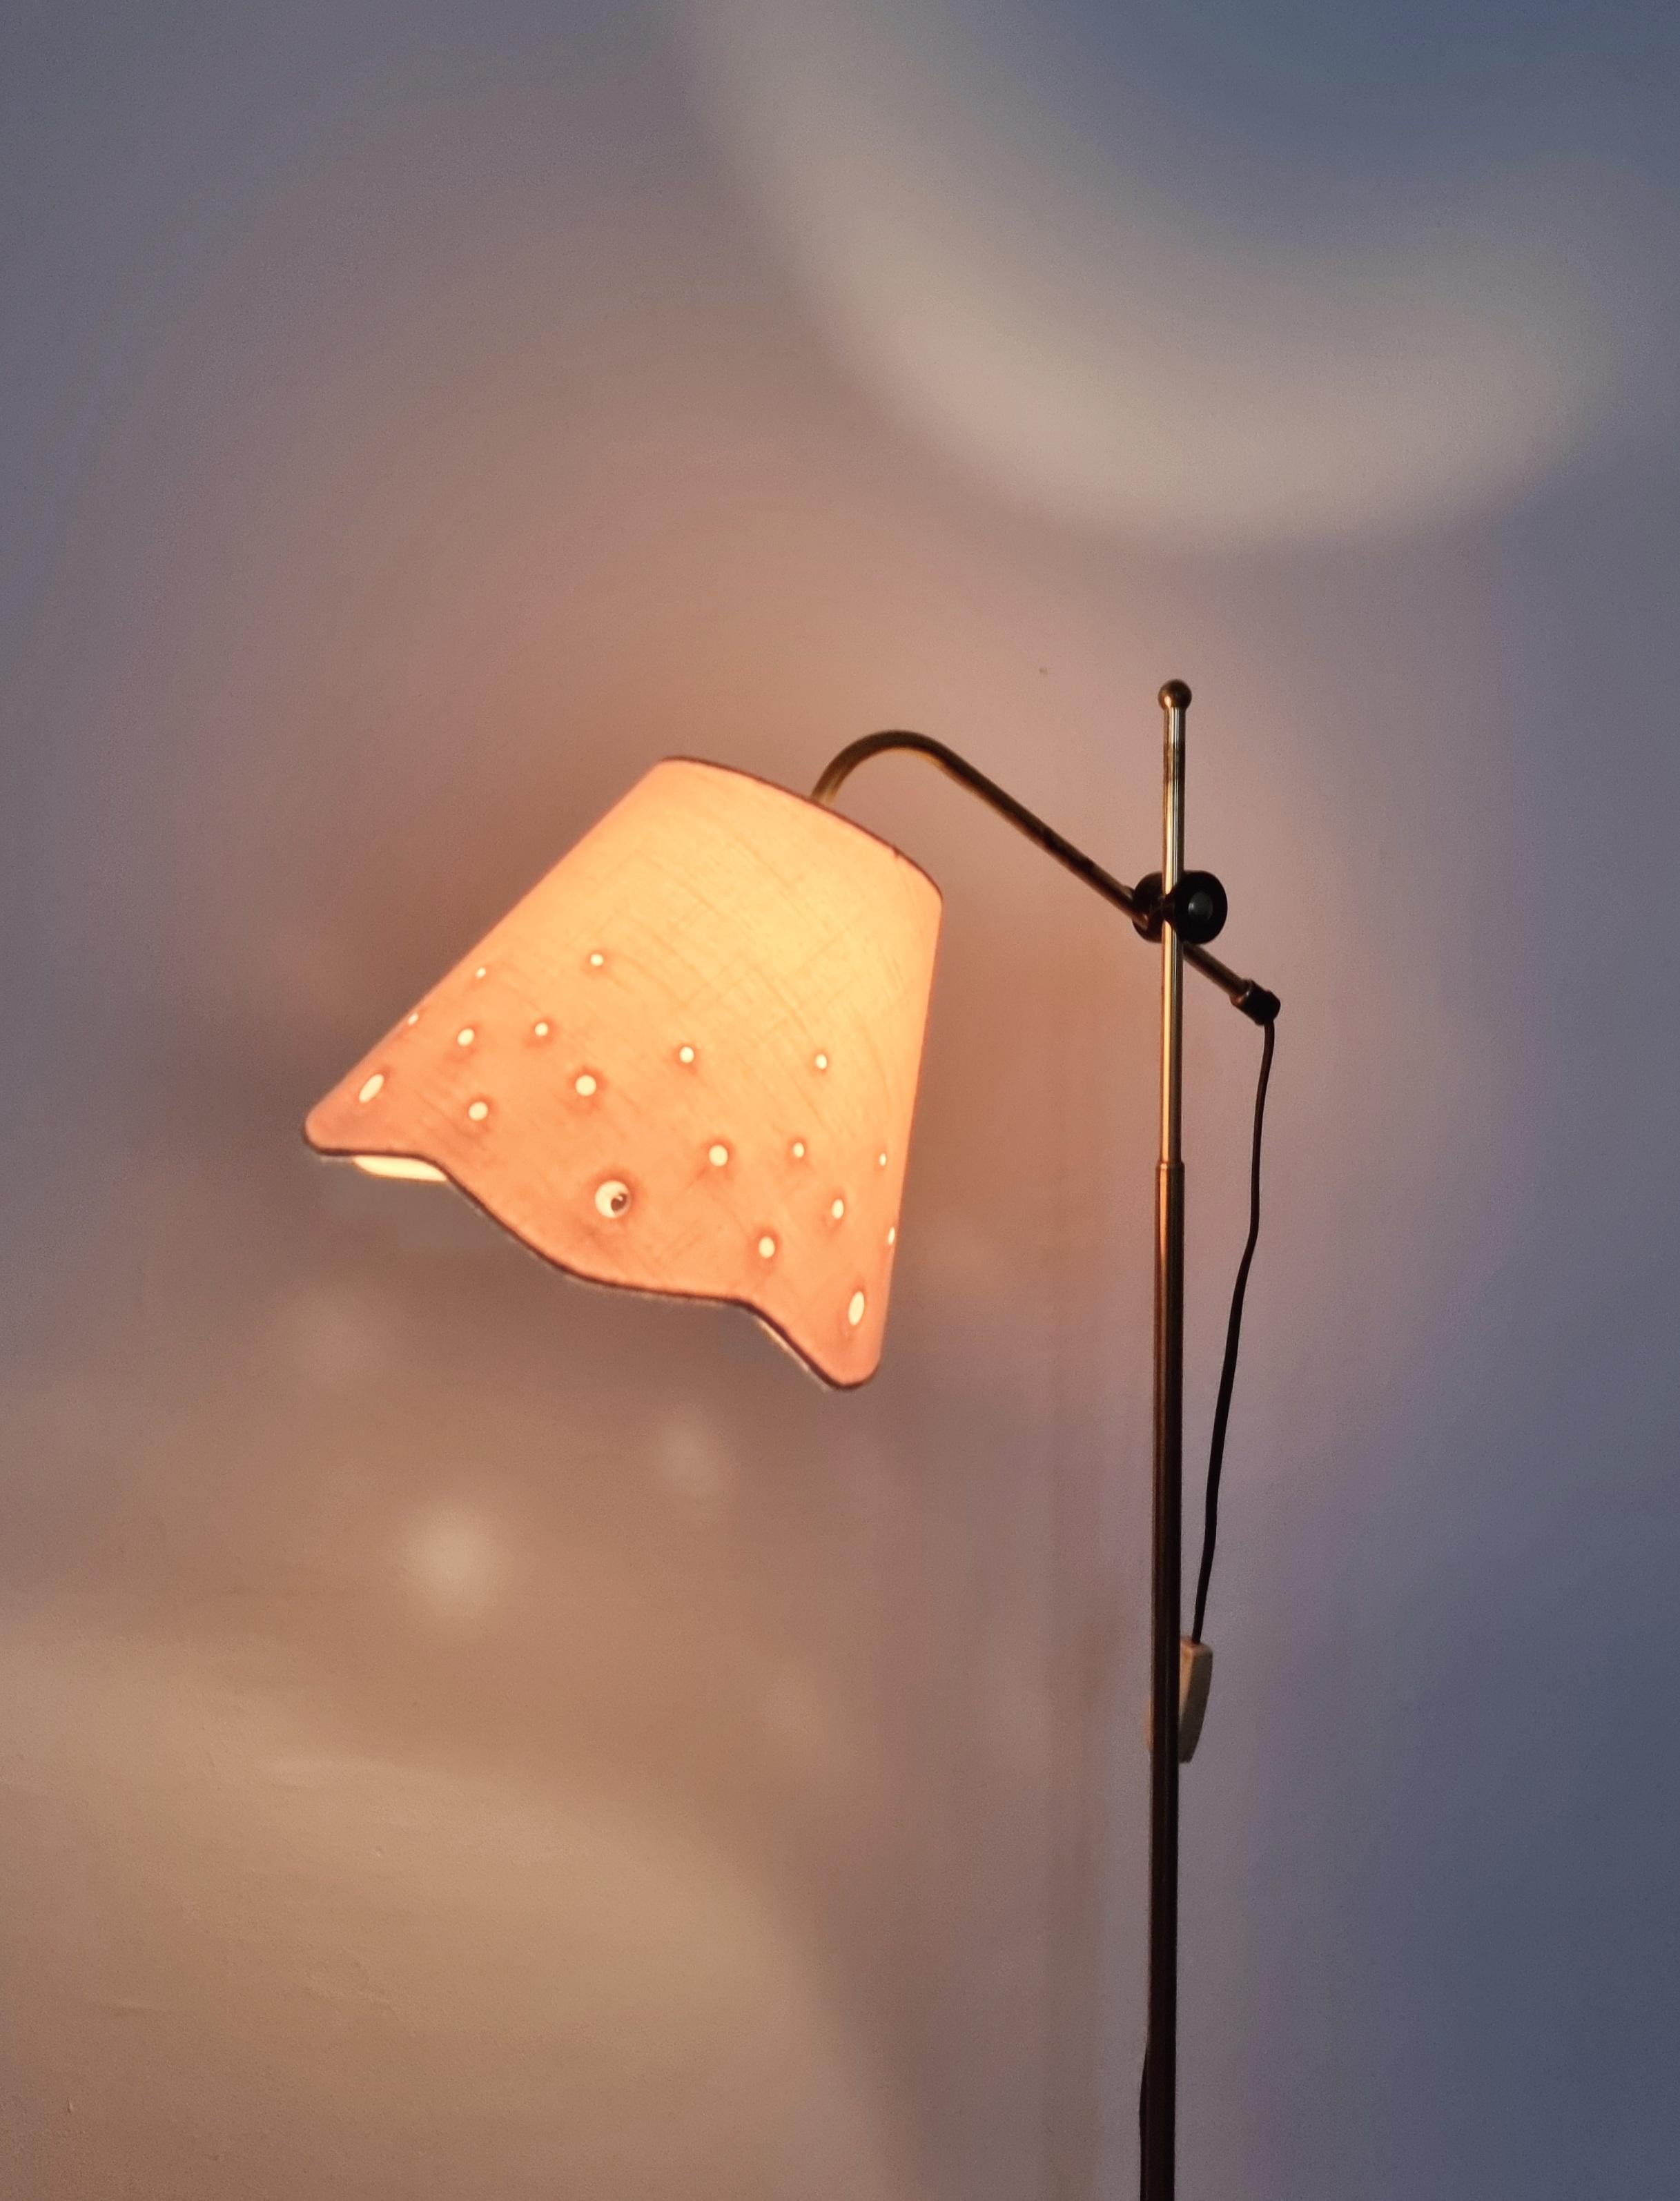 Möllers Armaturfabrik Eskilstuna (MAE), floor lamp in brass and cast iron with plastic details. 

Original beautiful white shade with perforated decorative details. 

